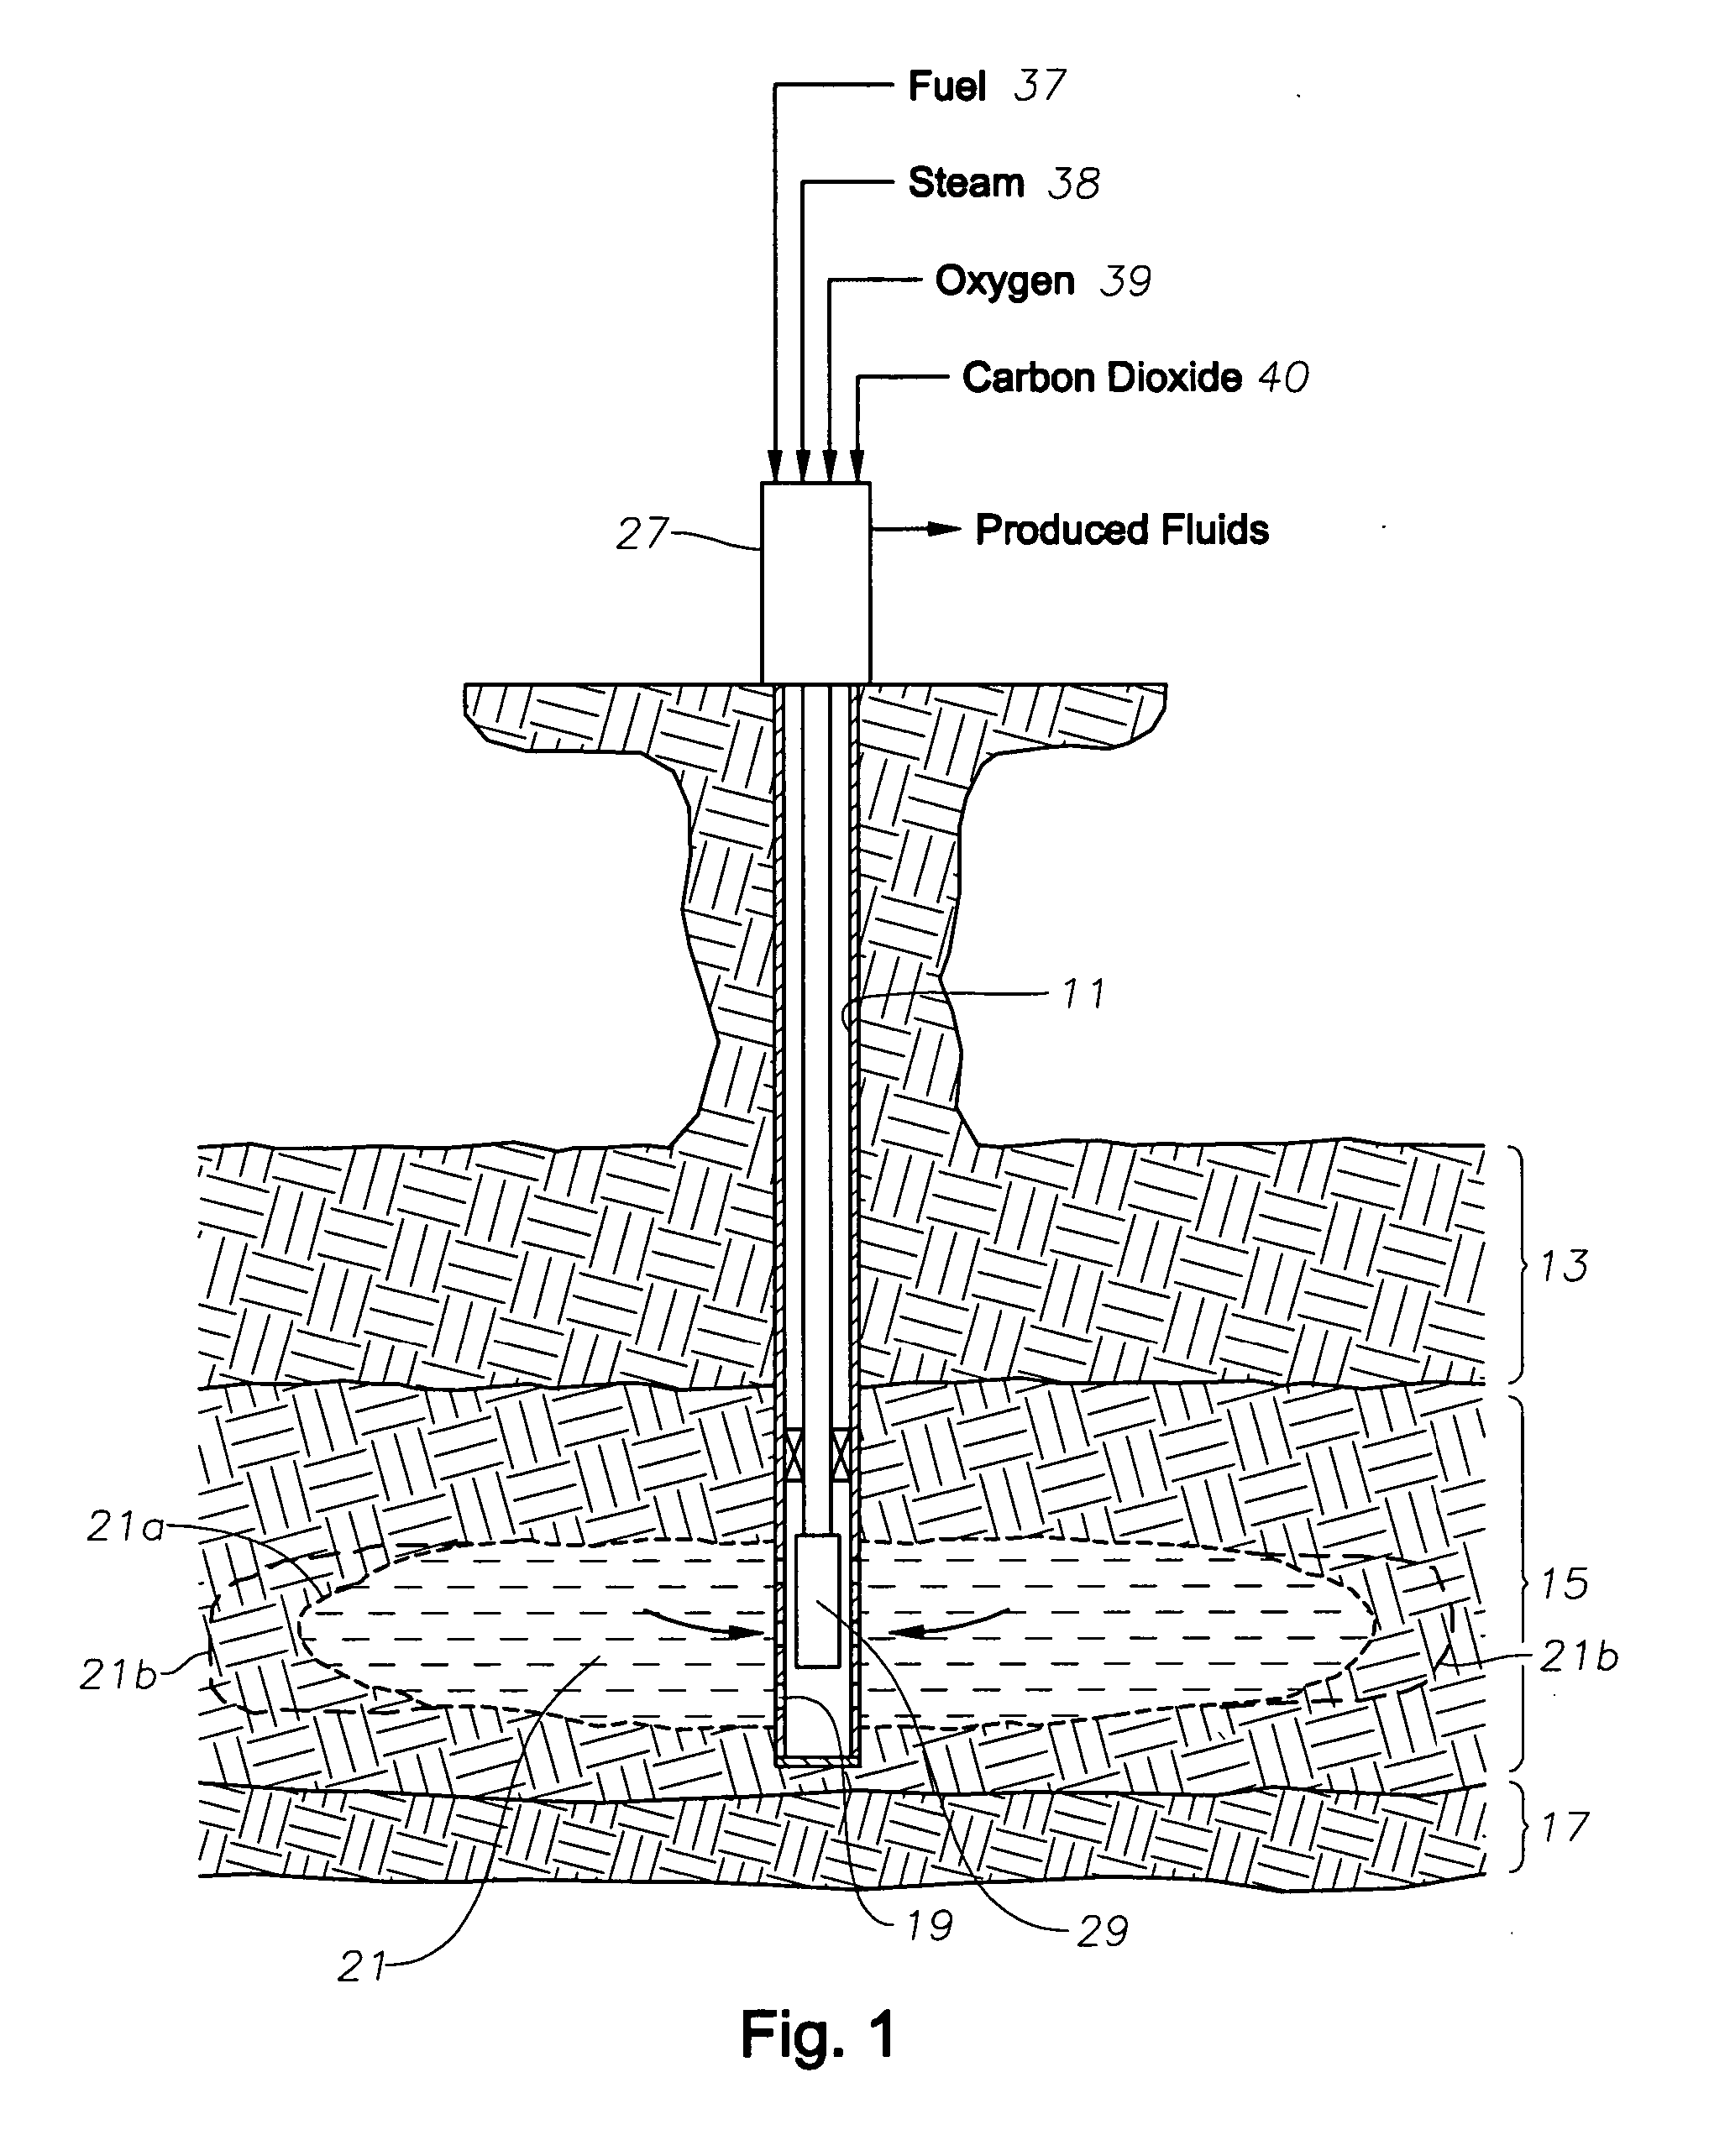 Method for producing viscous hydrocarbon using steam and carbon dioxide